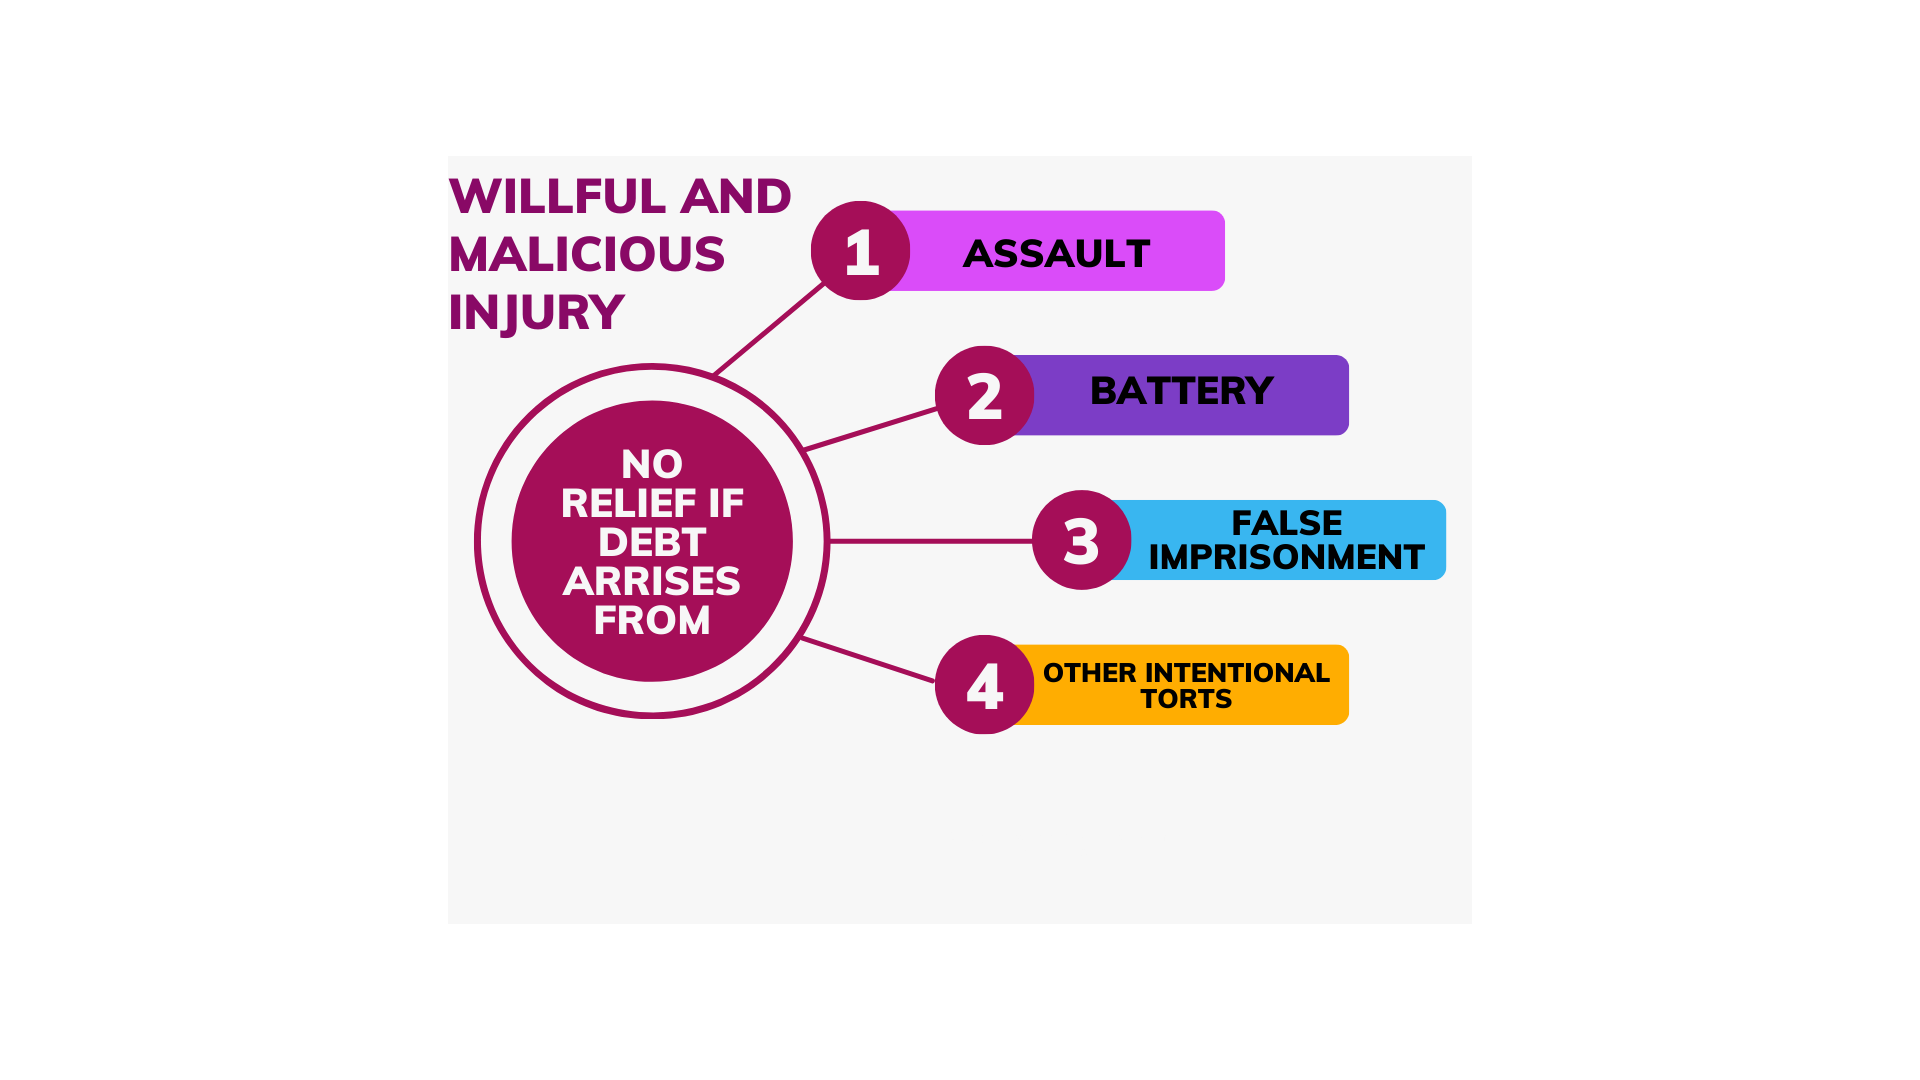 Flowchart outlining that there is no debt relief in cases of willful and malicious injury from assault, battery, false imprisonment, and other intentional torts.